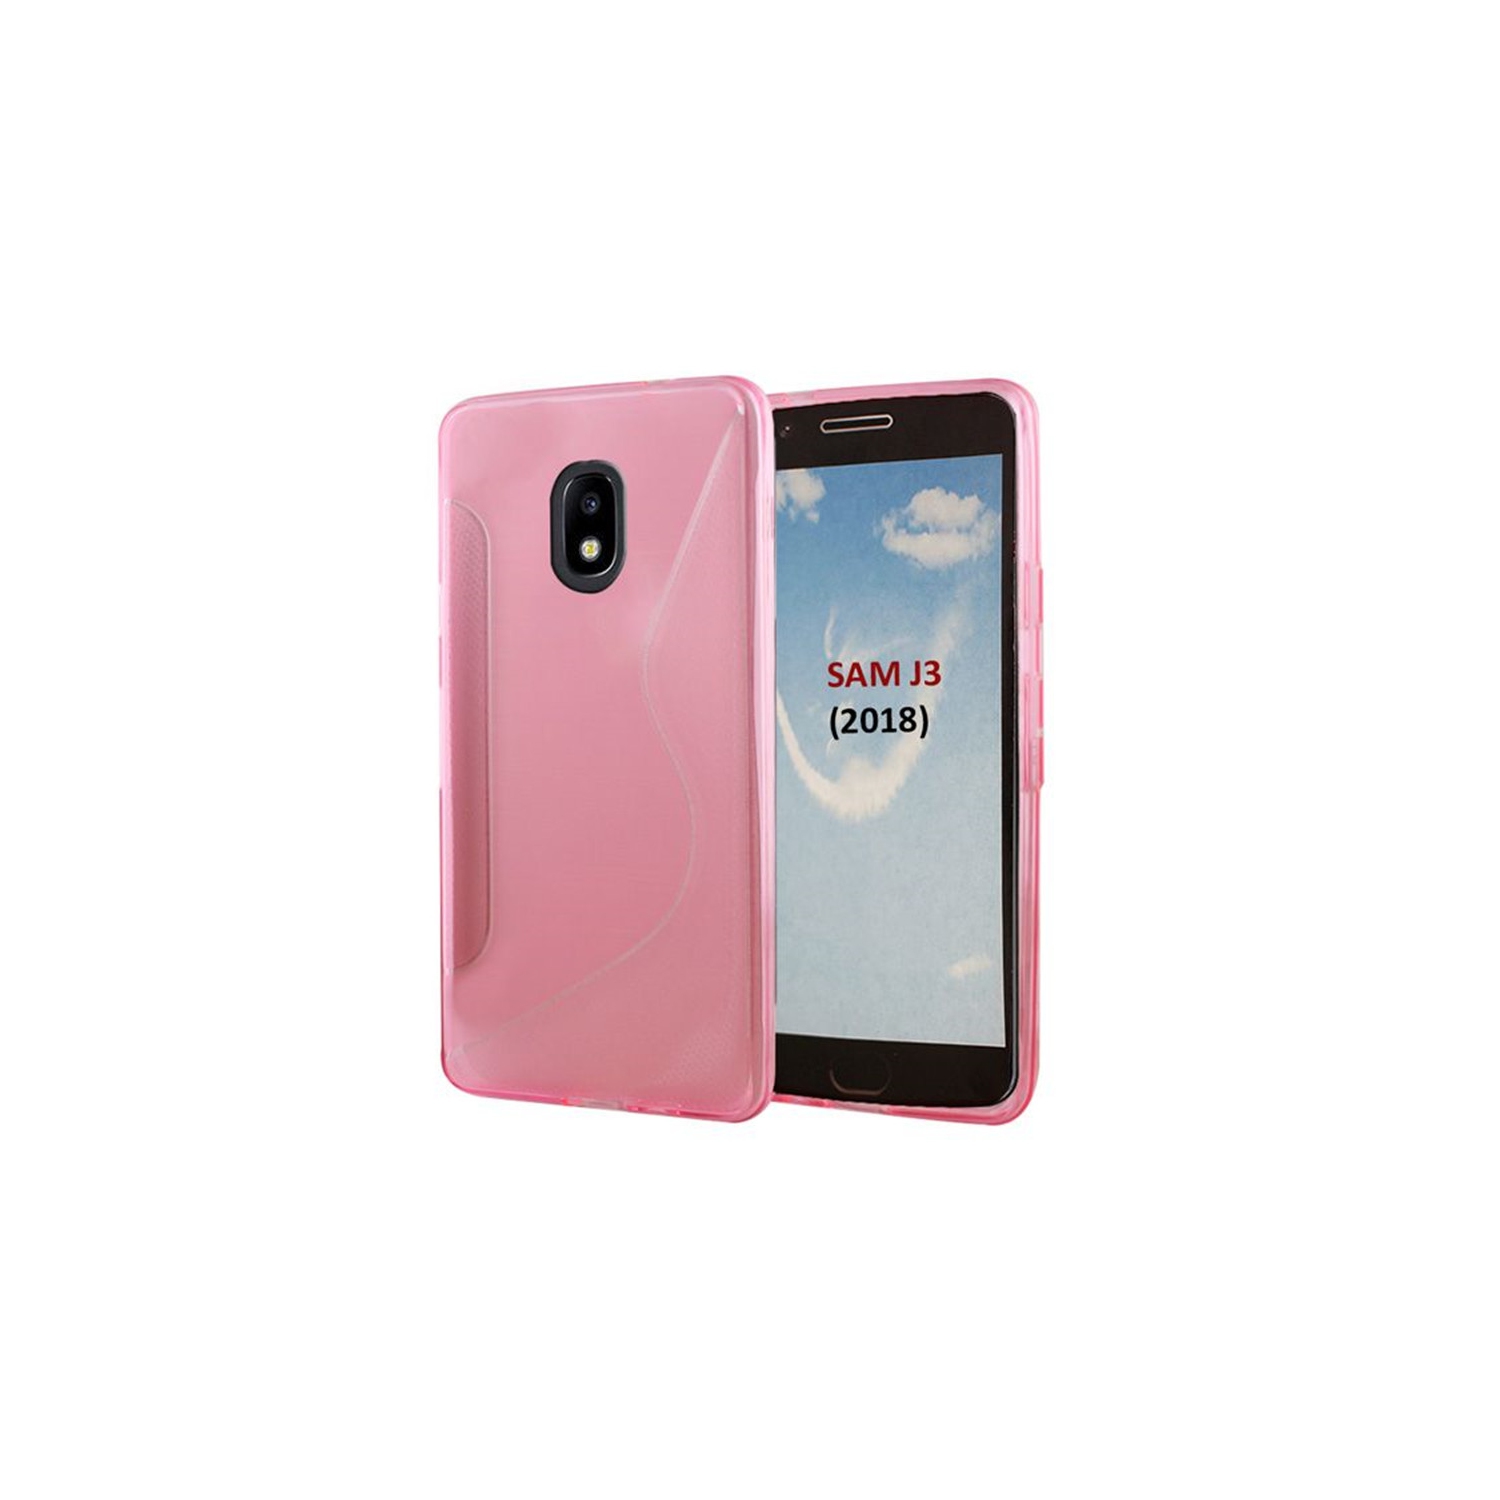 【CSmart】 Ultra Thin Soft TPU Silicone Jelly Bumper Back Cover Case for Samsung Galaxy J3 2018, Hot Pink